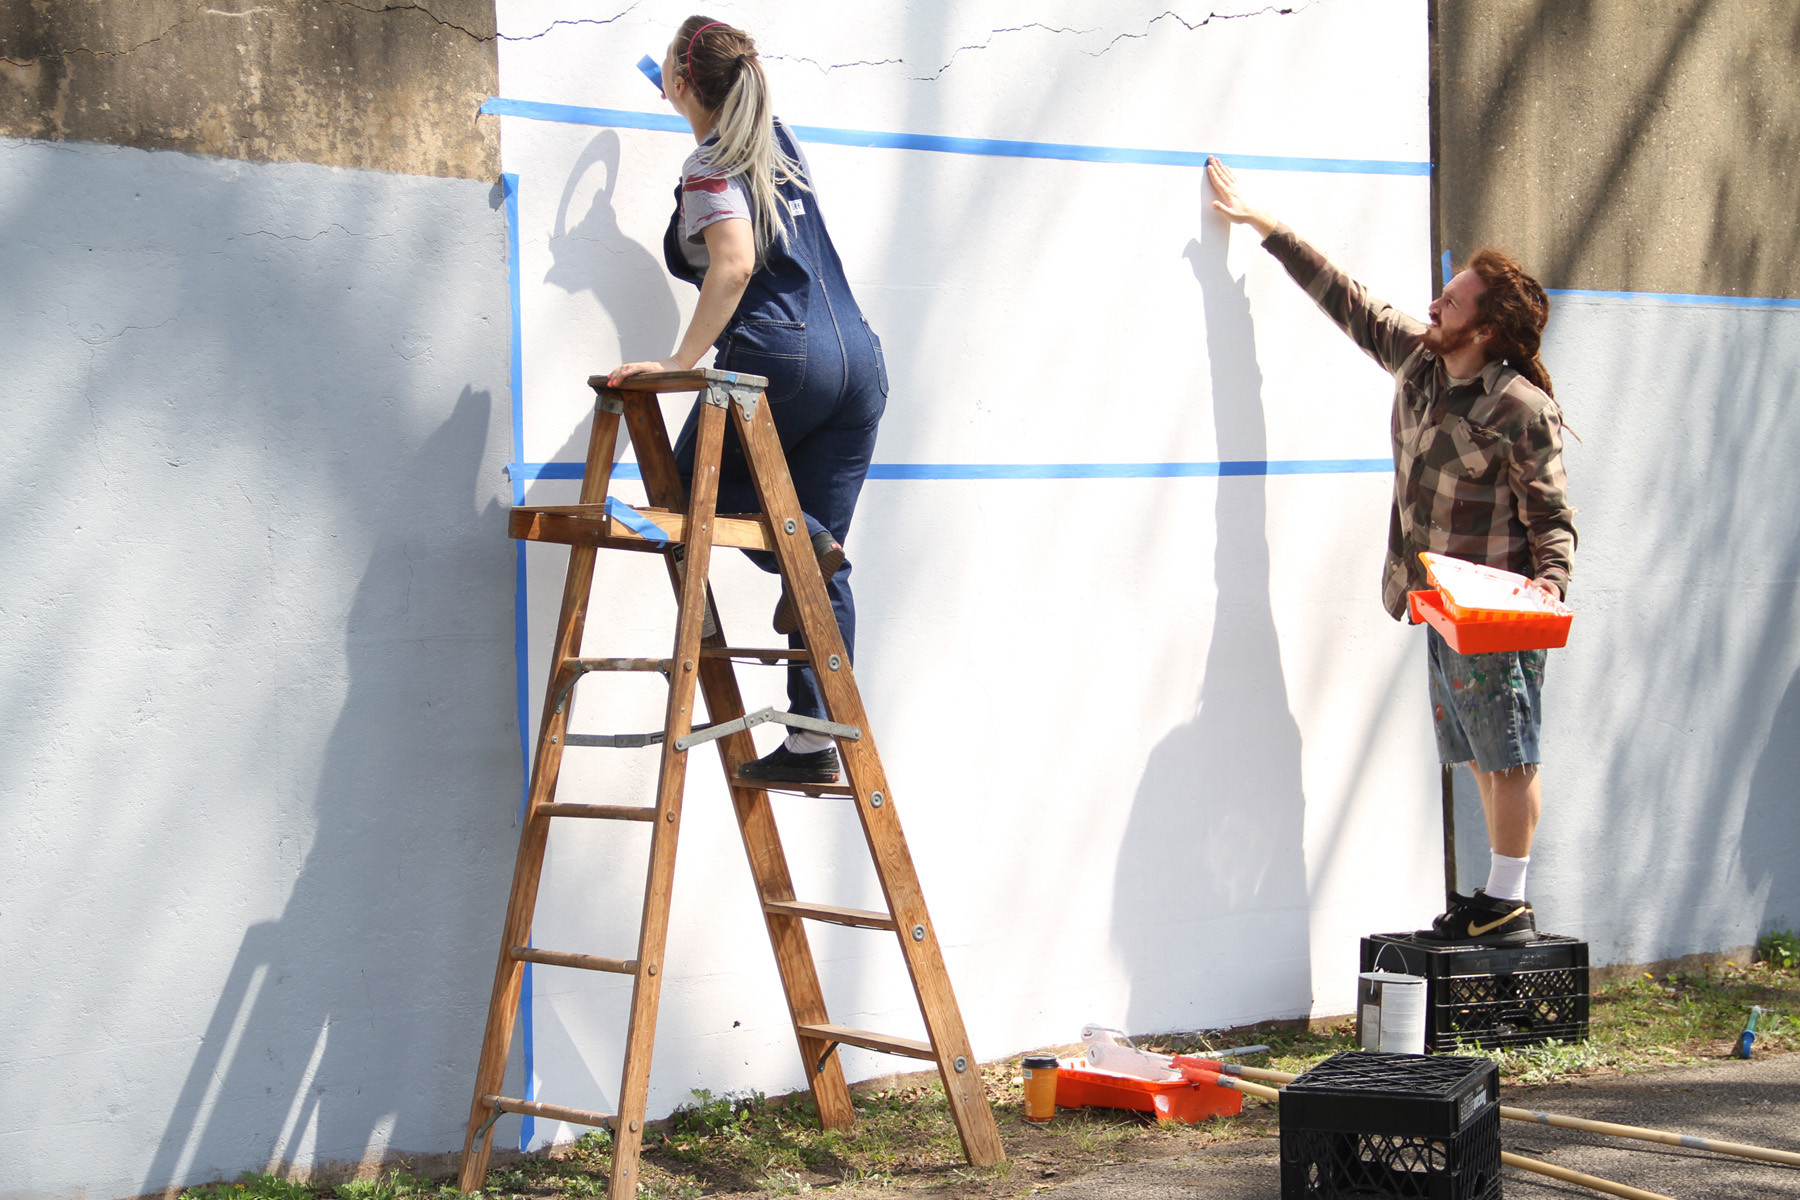 Artists Brittany Ruhnke and Christopher Berger prepared the trestle wall for the mural.